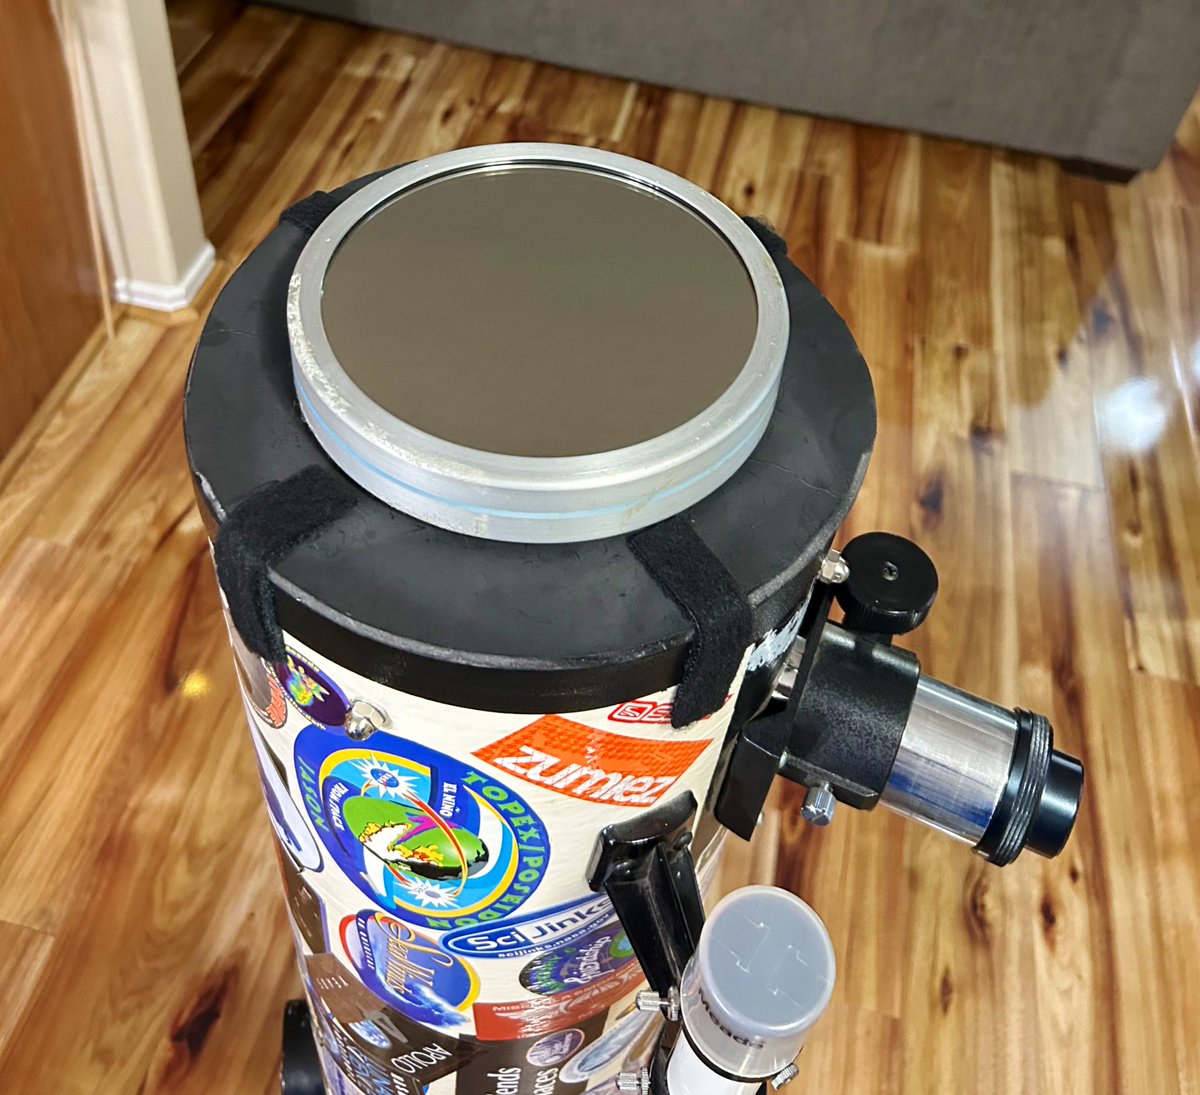 Kayla LaFrance on X: Made a new filter holder for my solar filter… all  nice and snug so hoping no glare issues now…. Also made a shield for the  eye piece.